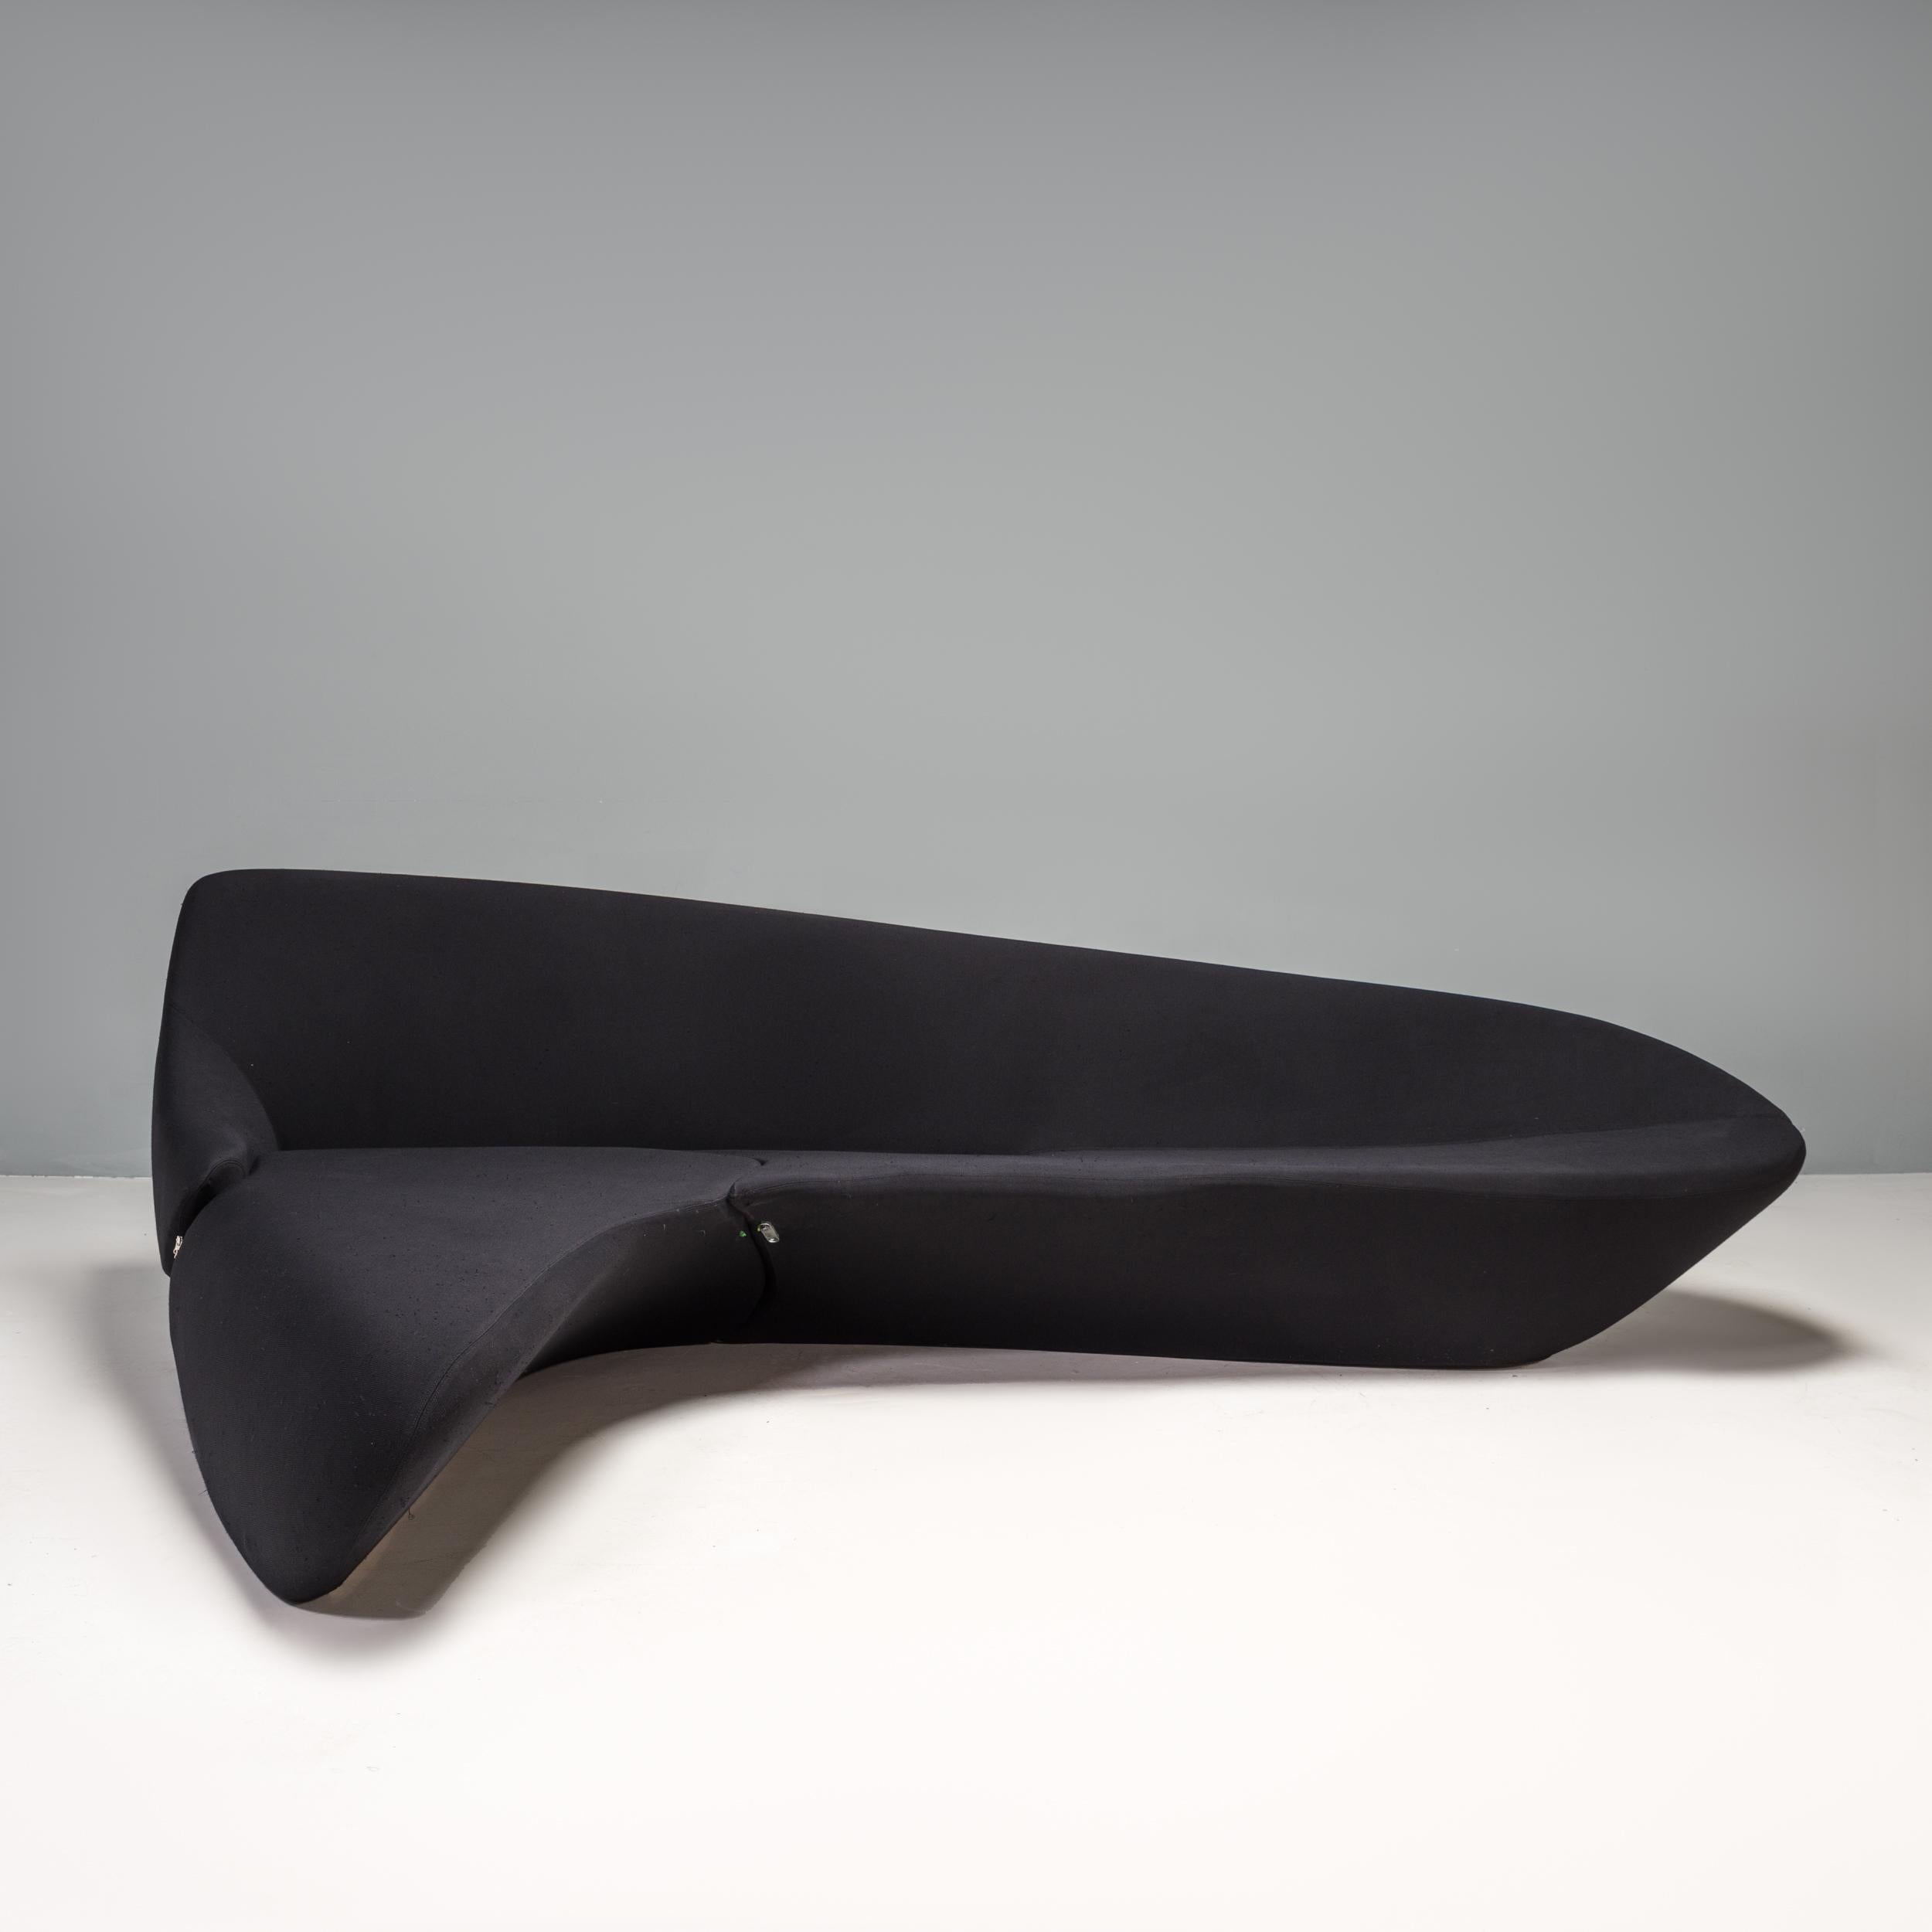 Originally designed by Zaha Hadid in 2007, the Moon sofa draws on the sculptural shapes of Hadid’s architectural designs.

The moon sofa has a distinctive silhouette with intersecting curvilinear shapes that gives the impression of being a single